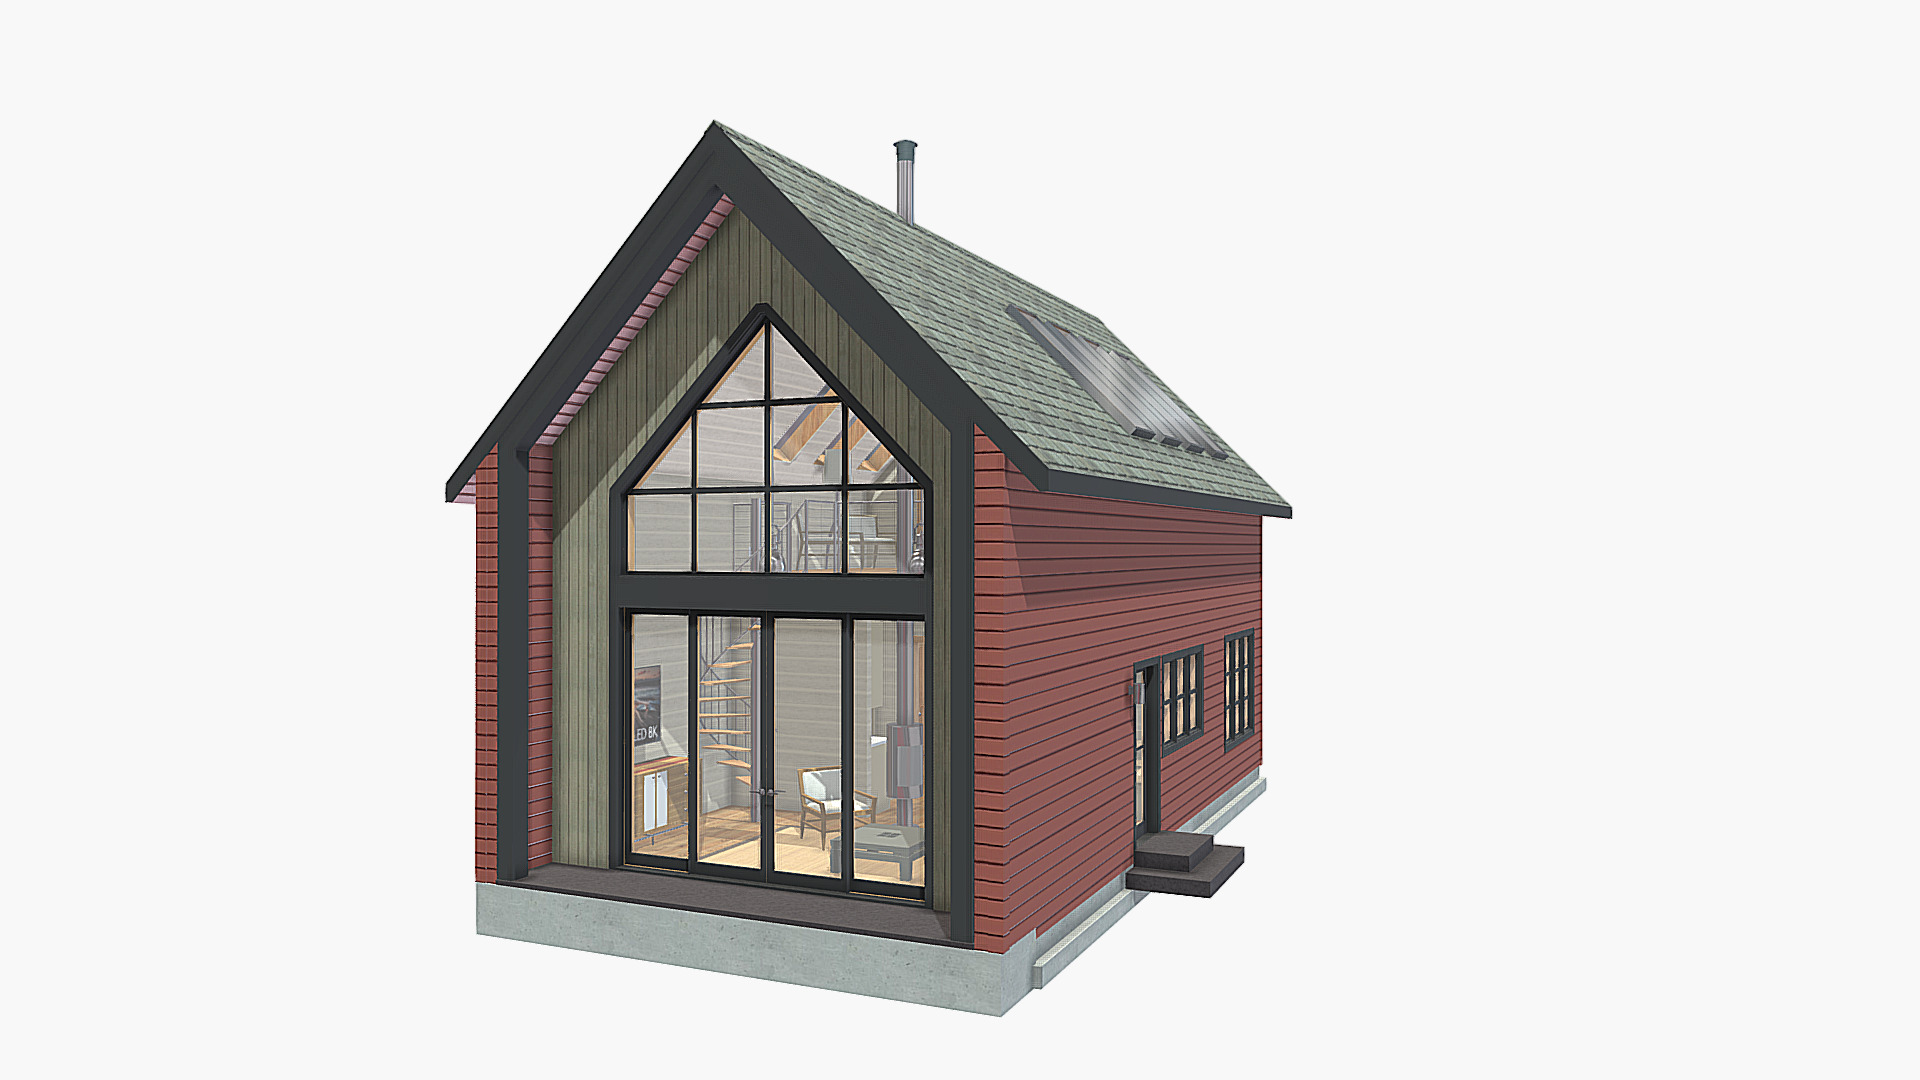 3D model The Lockwood – Full house model - This is a 3D model of the The Lockwood - Full house model. The 3D model is about a small red house.